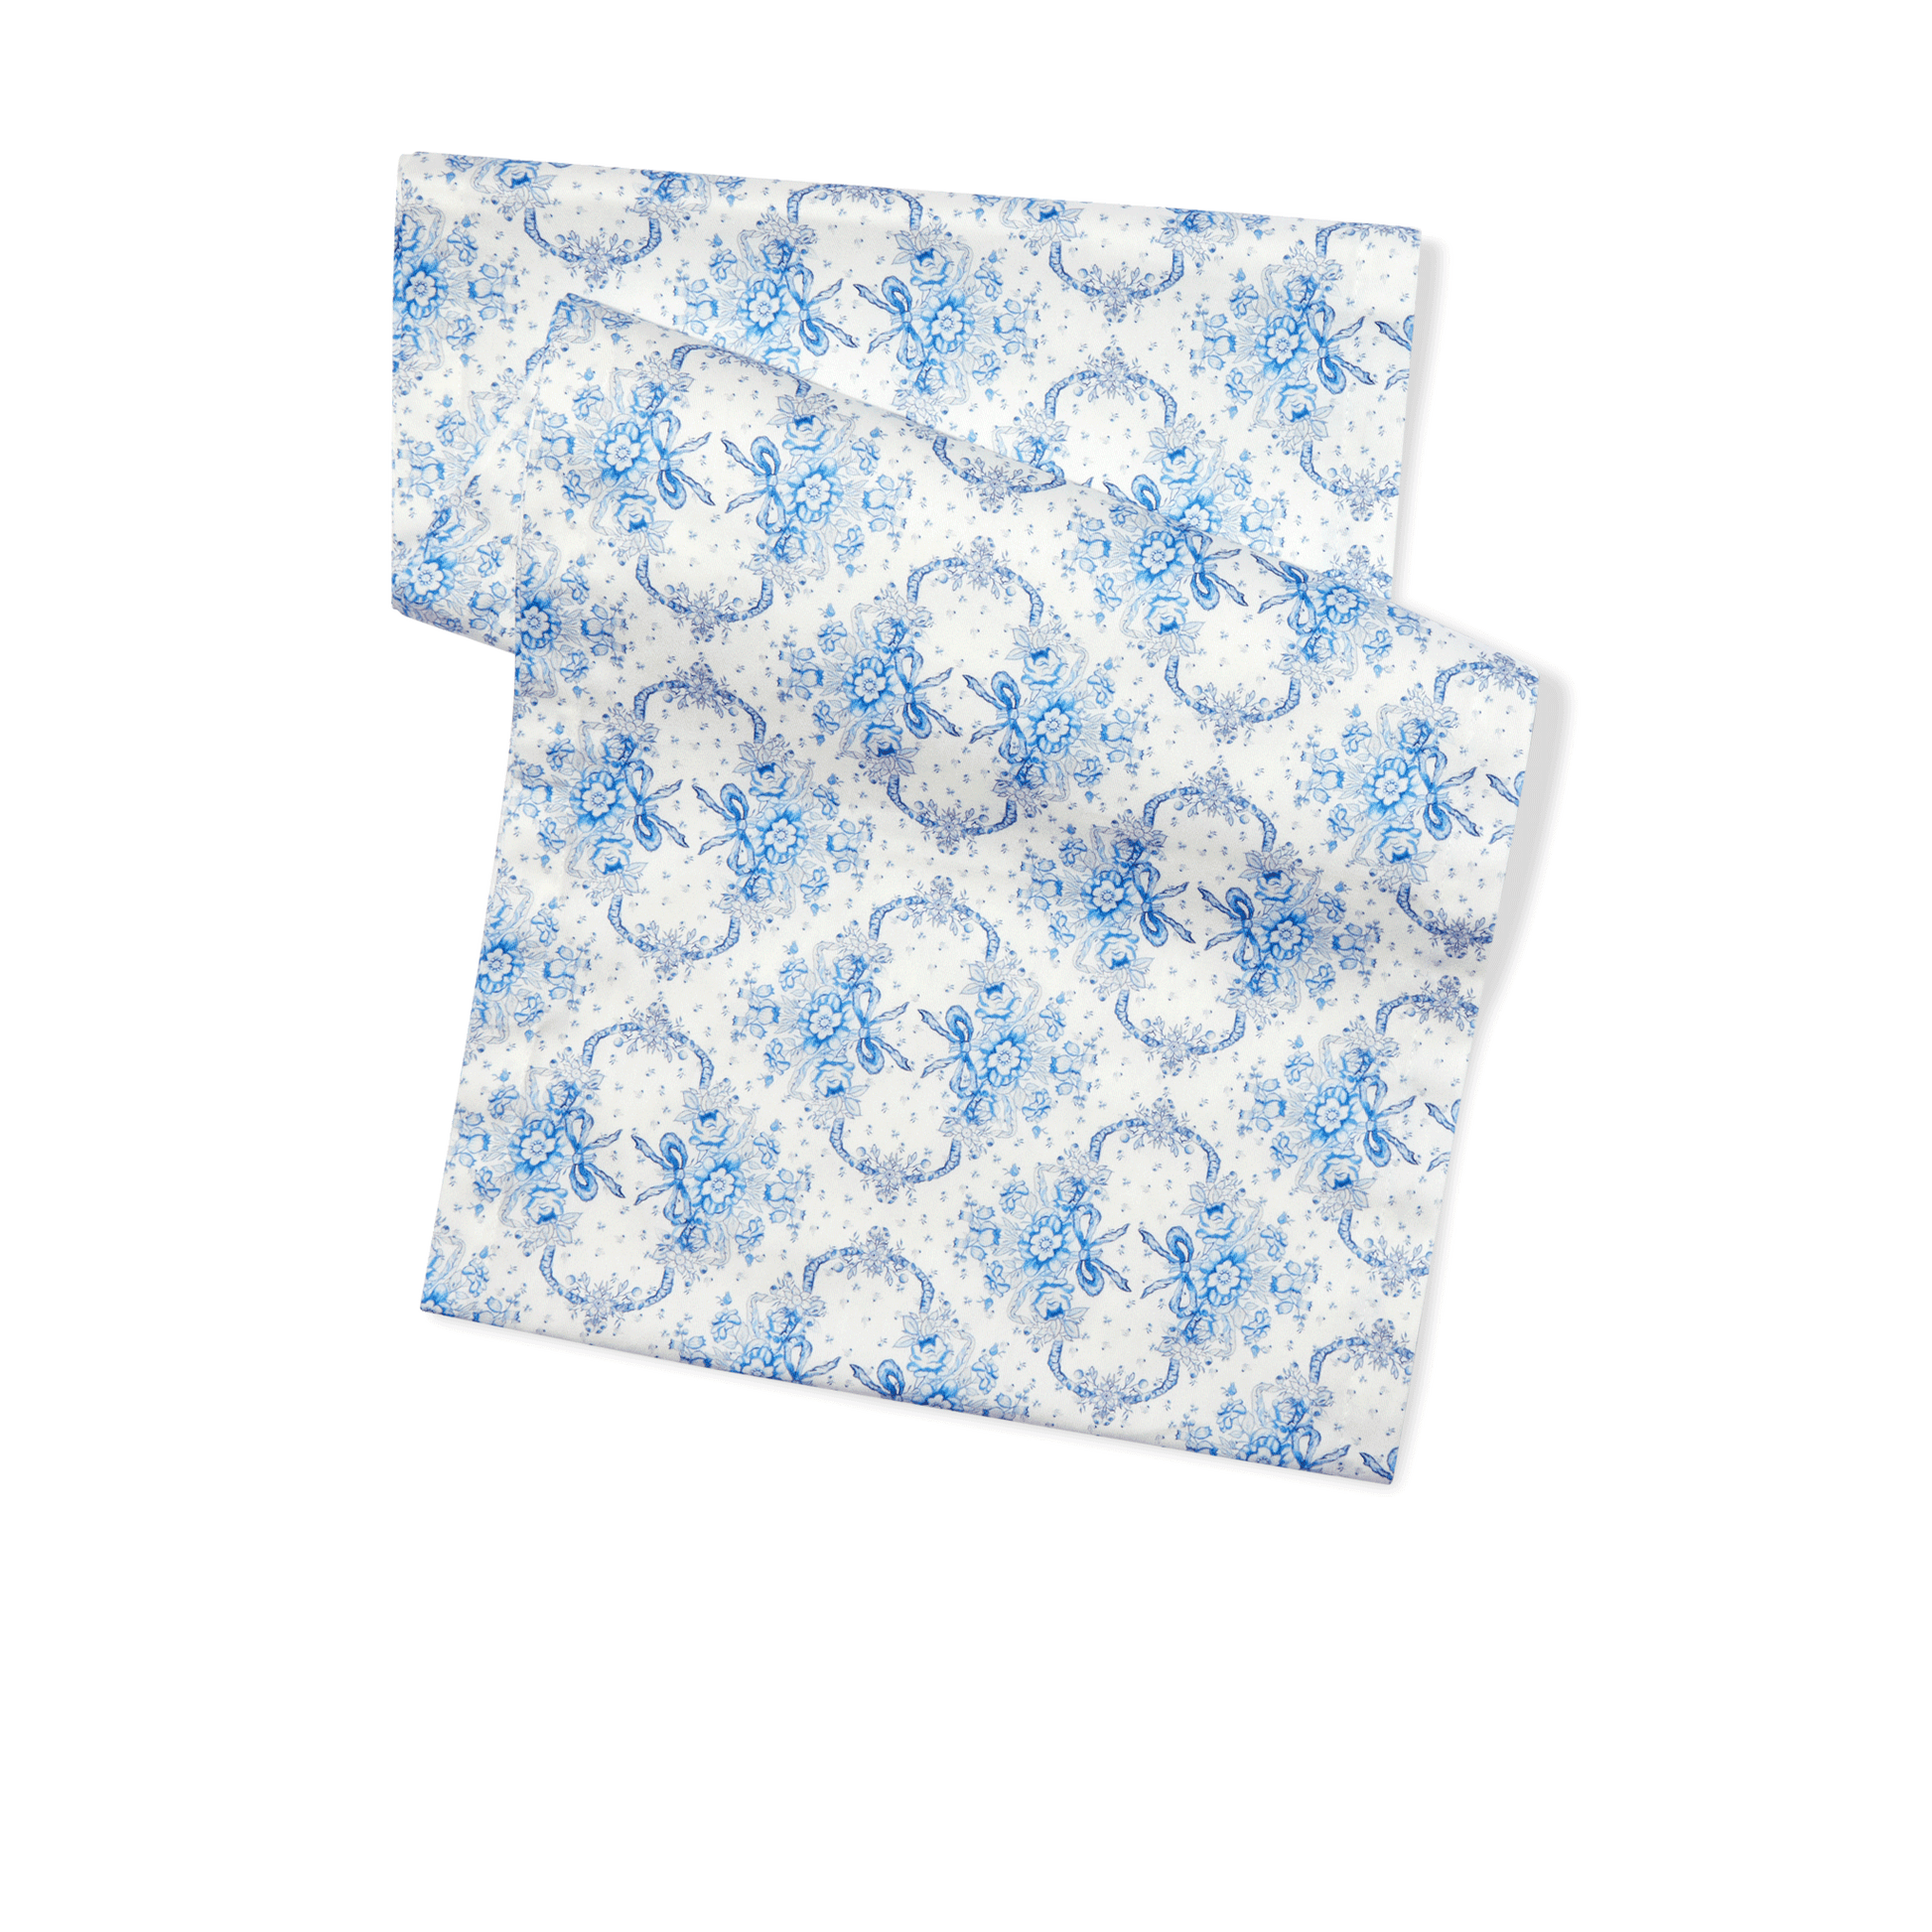 Table Runner Sarah Flint x Maman Blue And White Cotton